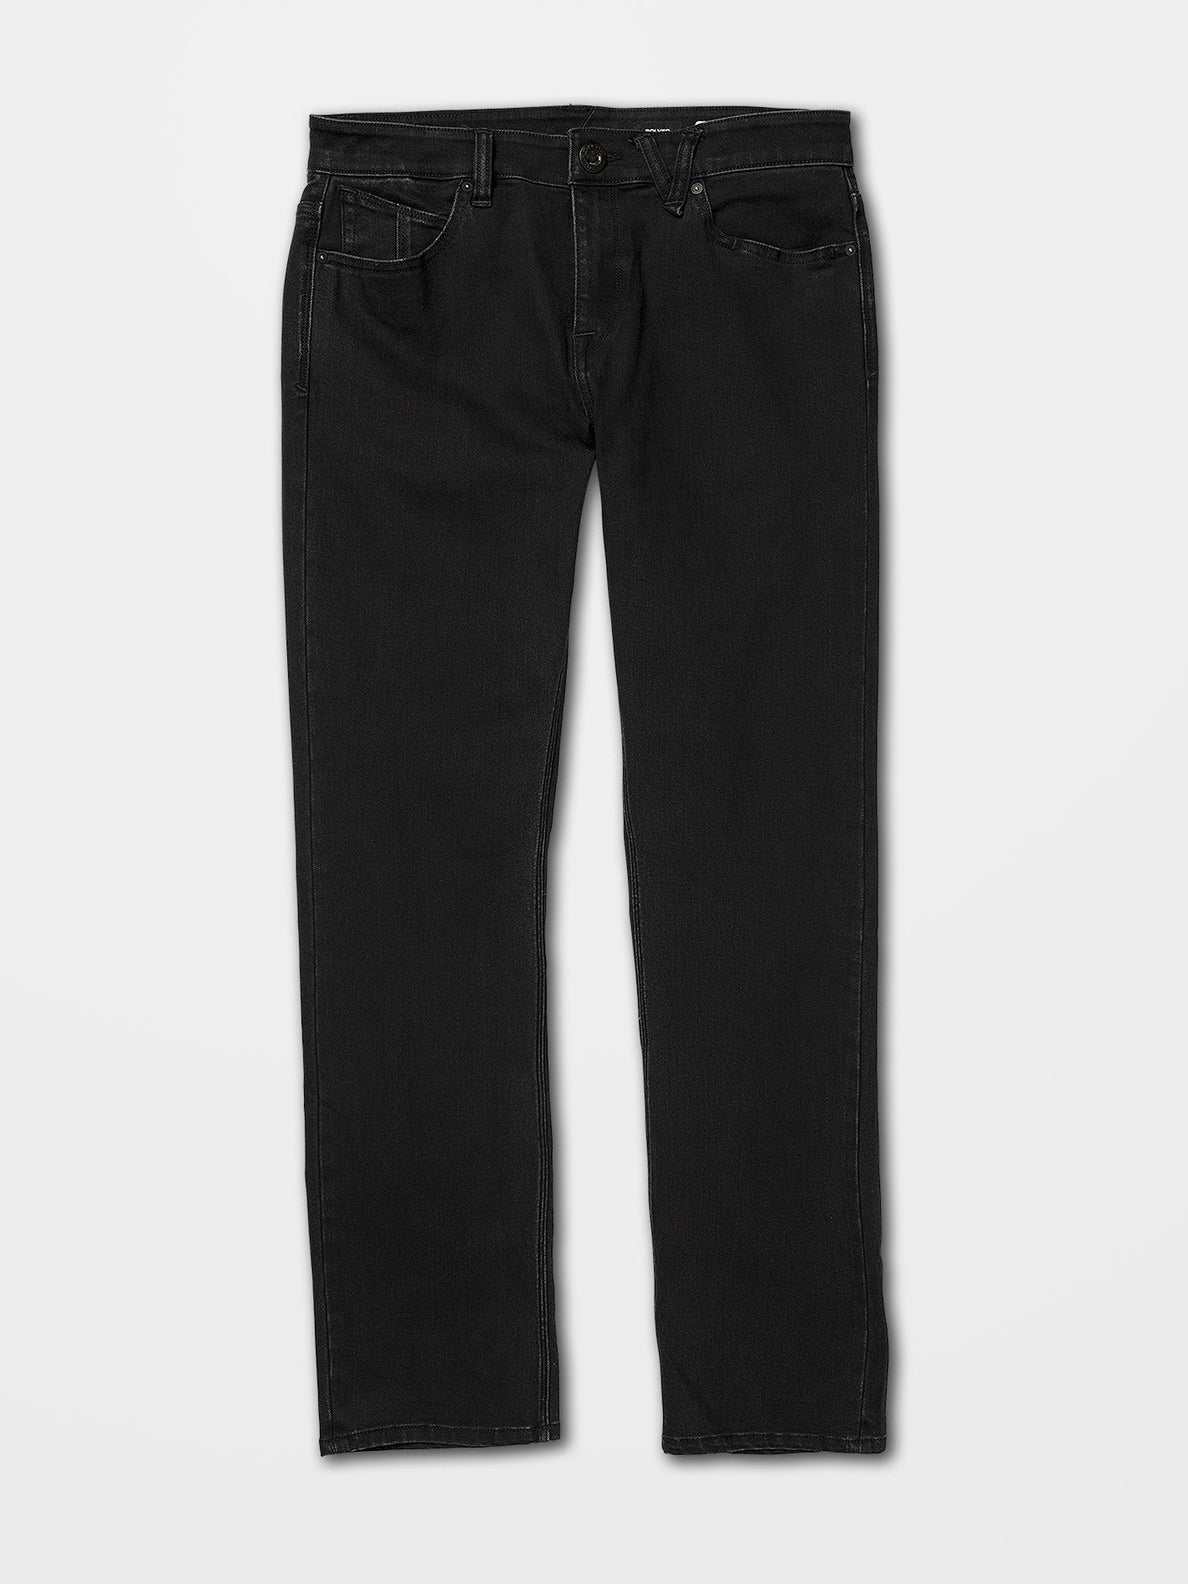 Solver Jeans - BLACK OUT (A1912303_BKO) [3]